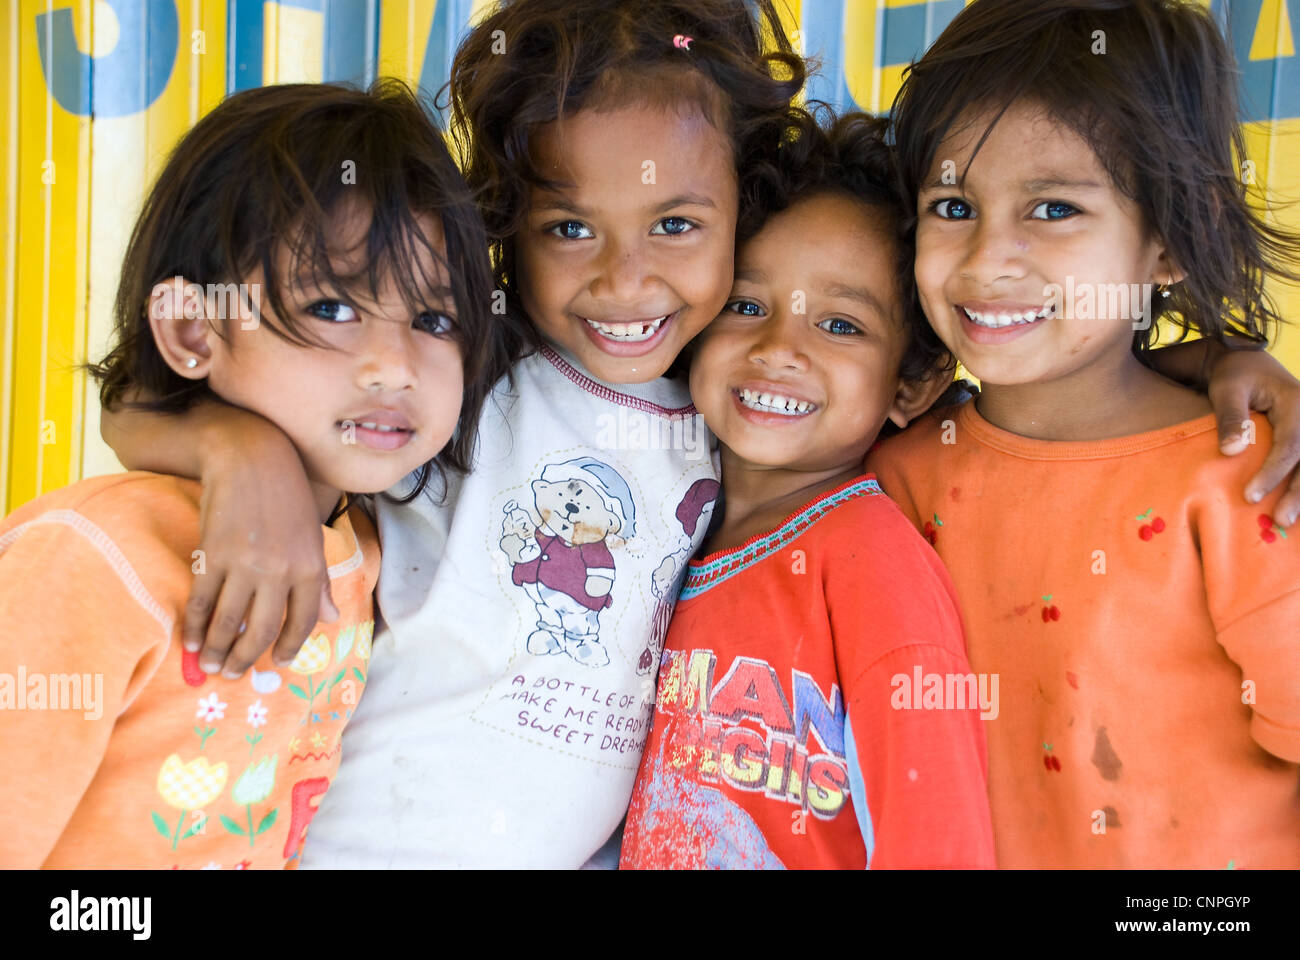 girls in kupang, west timor, indonesia Stock Photo